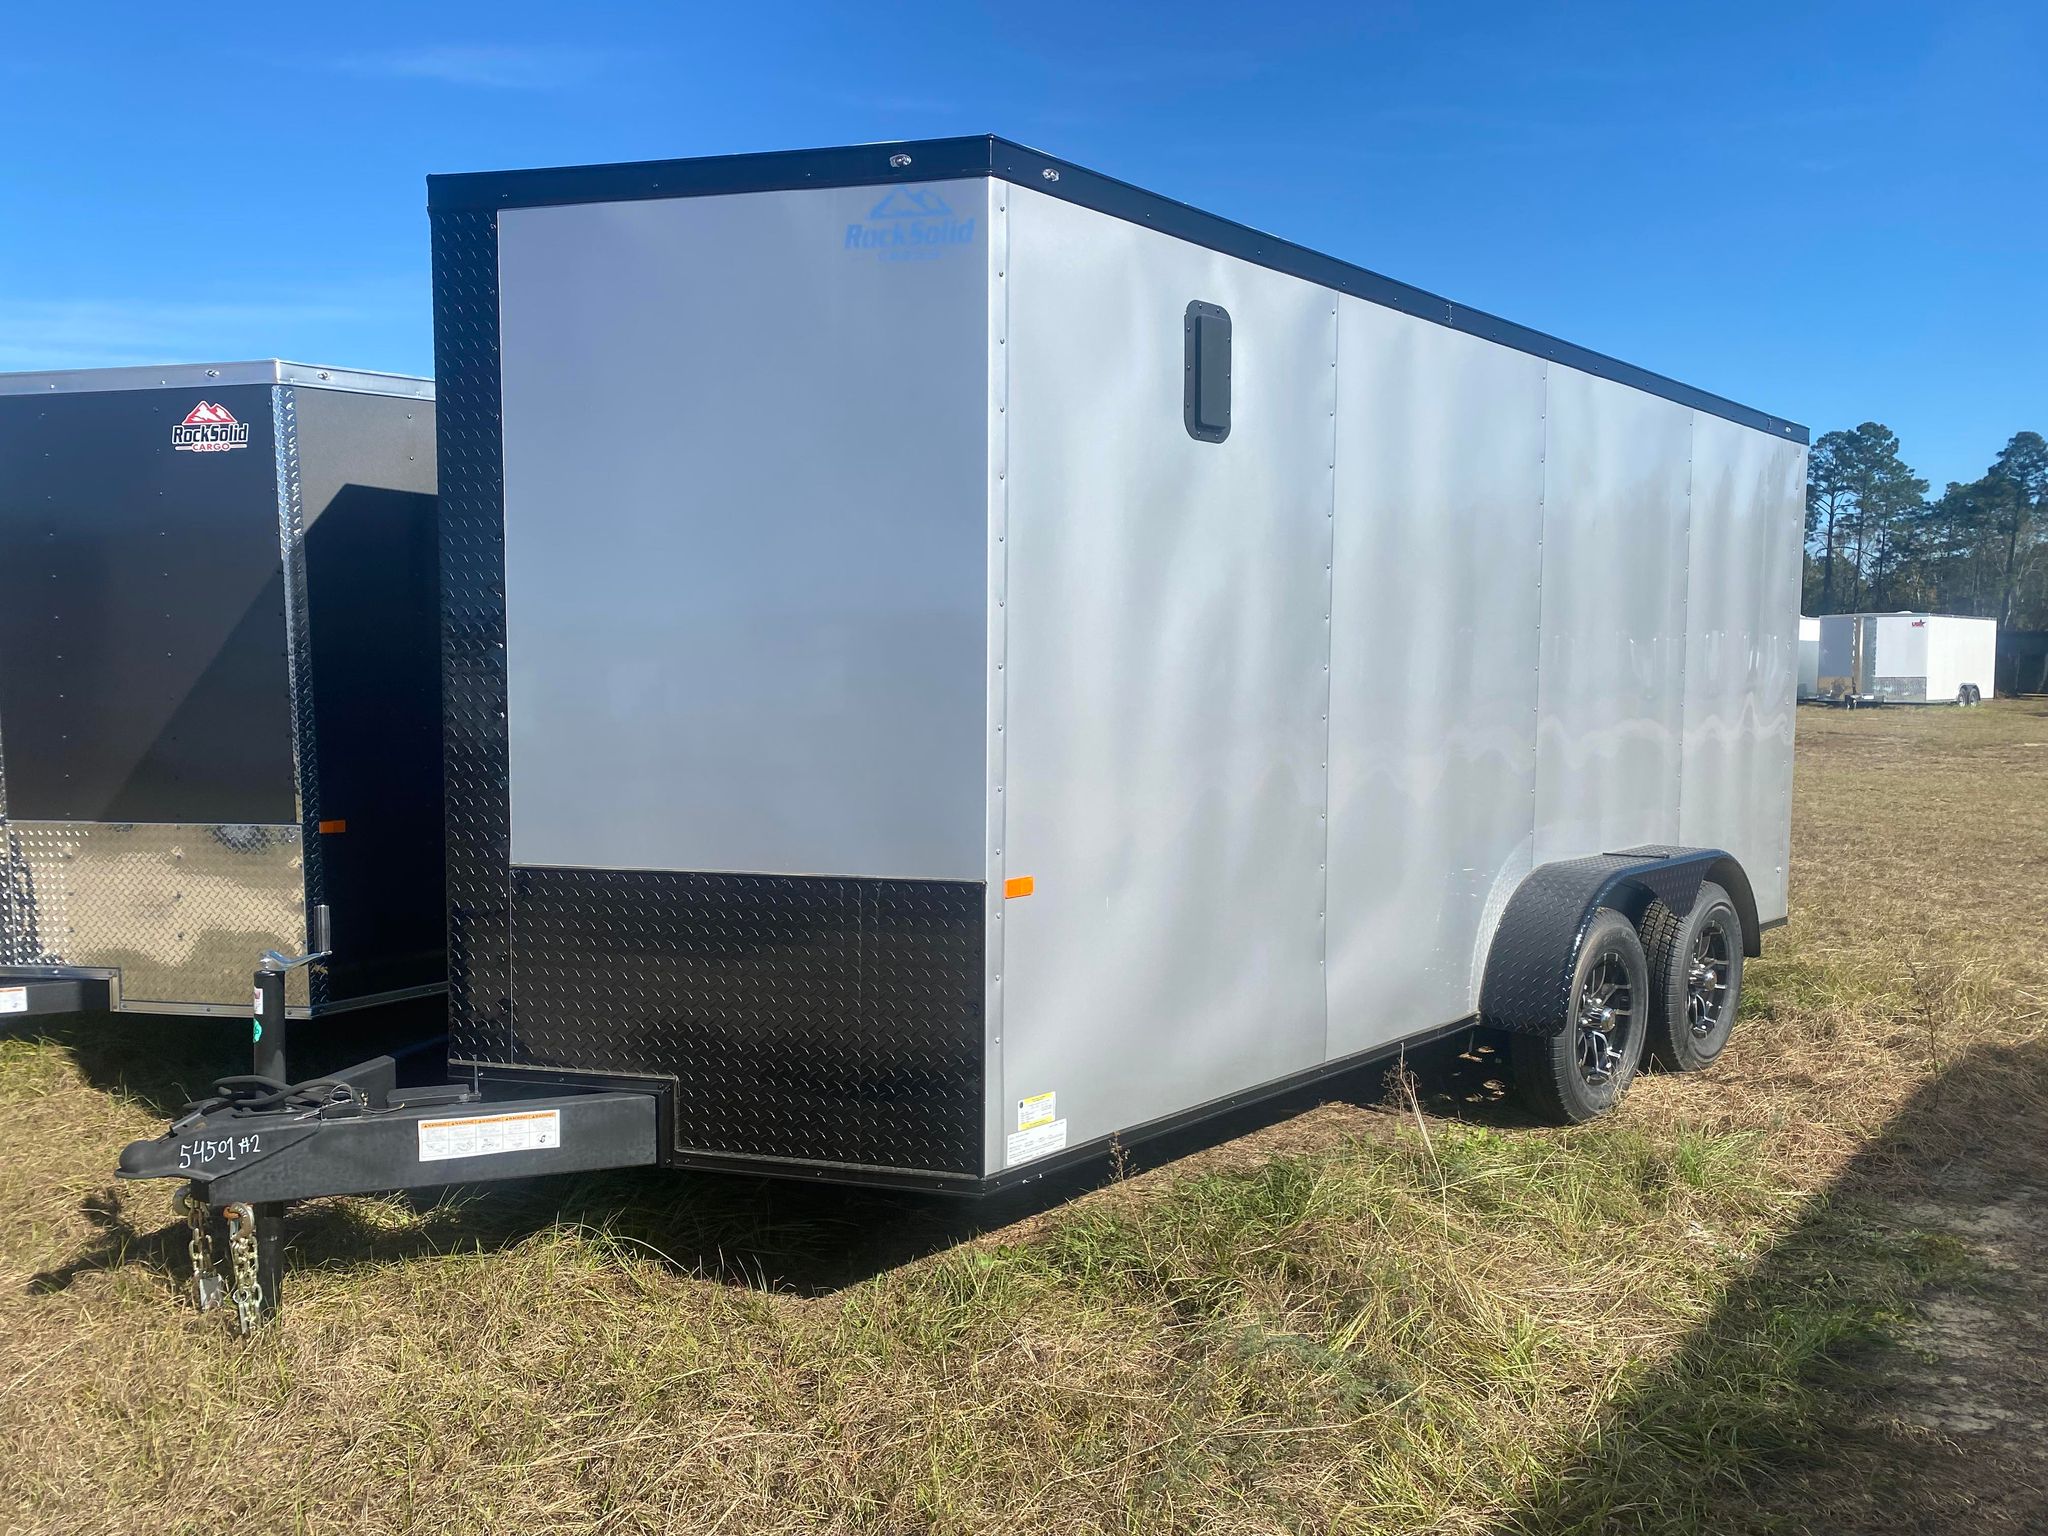 7 X 16 Enclosed Cargo Trailer for Sale | Silverfrost & Blackout Edition